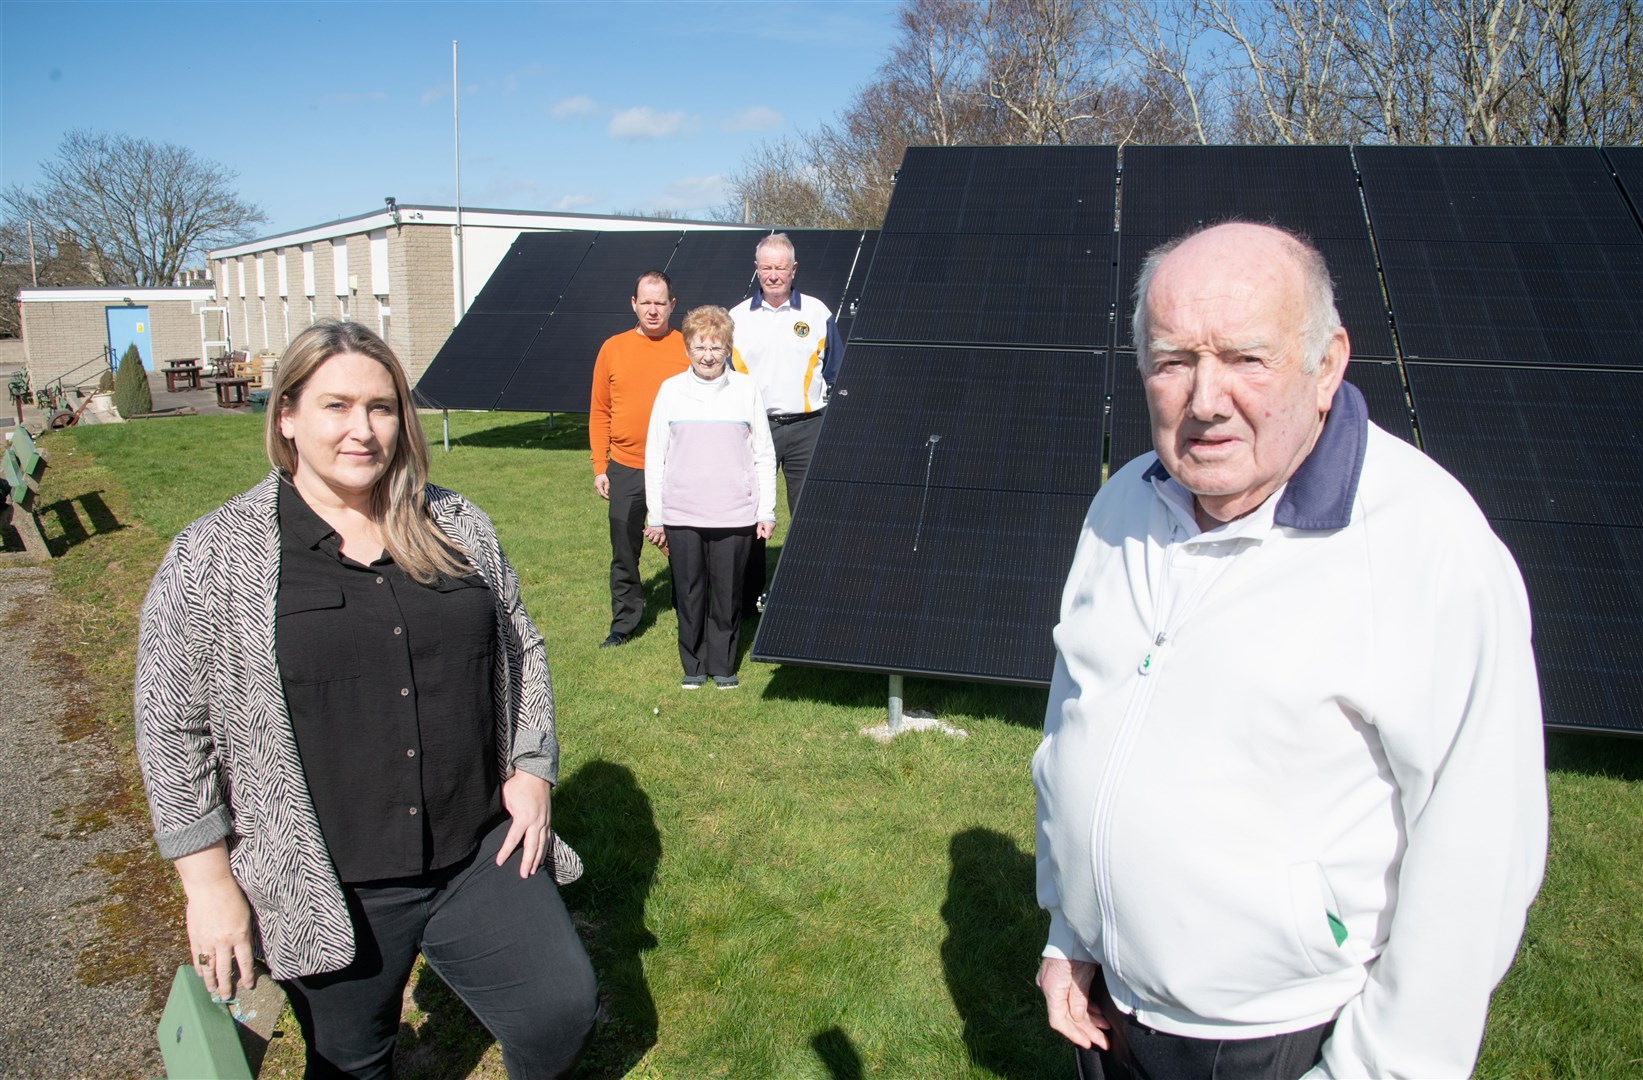 Karen Adam MSP and club president Allan Petrie (front) are joined by (back from left) club member Brian Strachan, secretary Margaret Petrie and vice-president Steve Horrocks in admiring the new solar panels. Picture: Daniel Forsyth